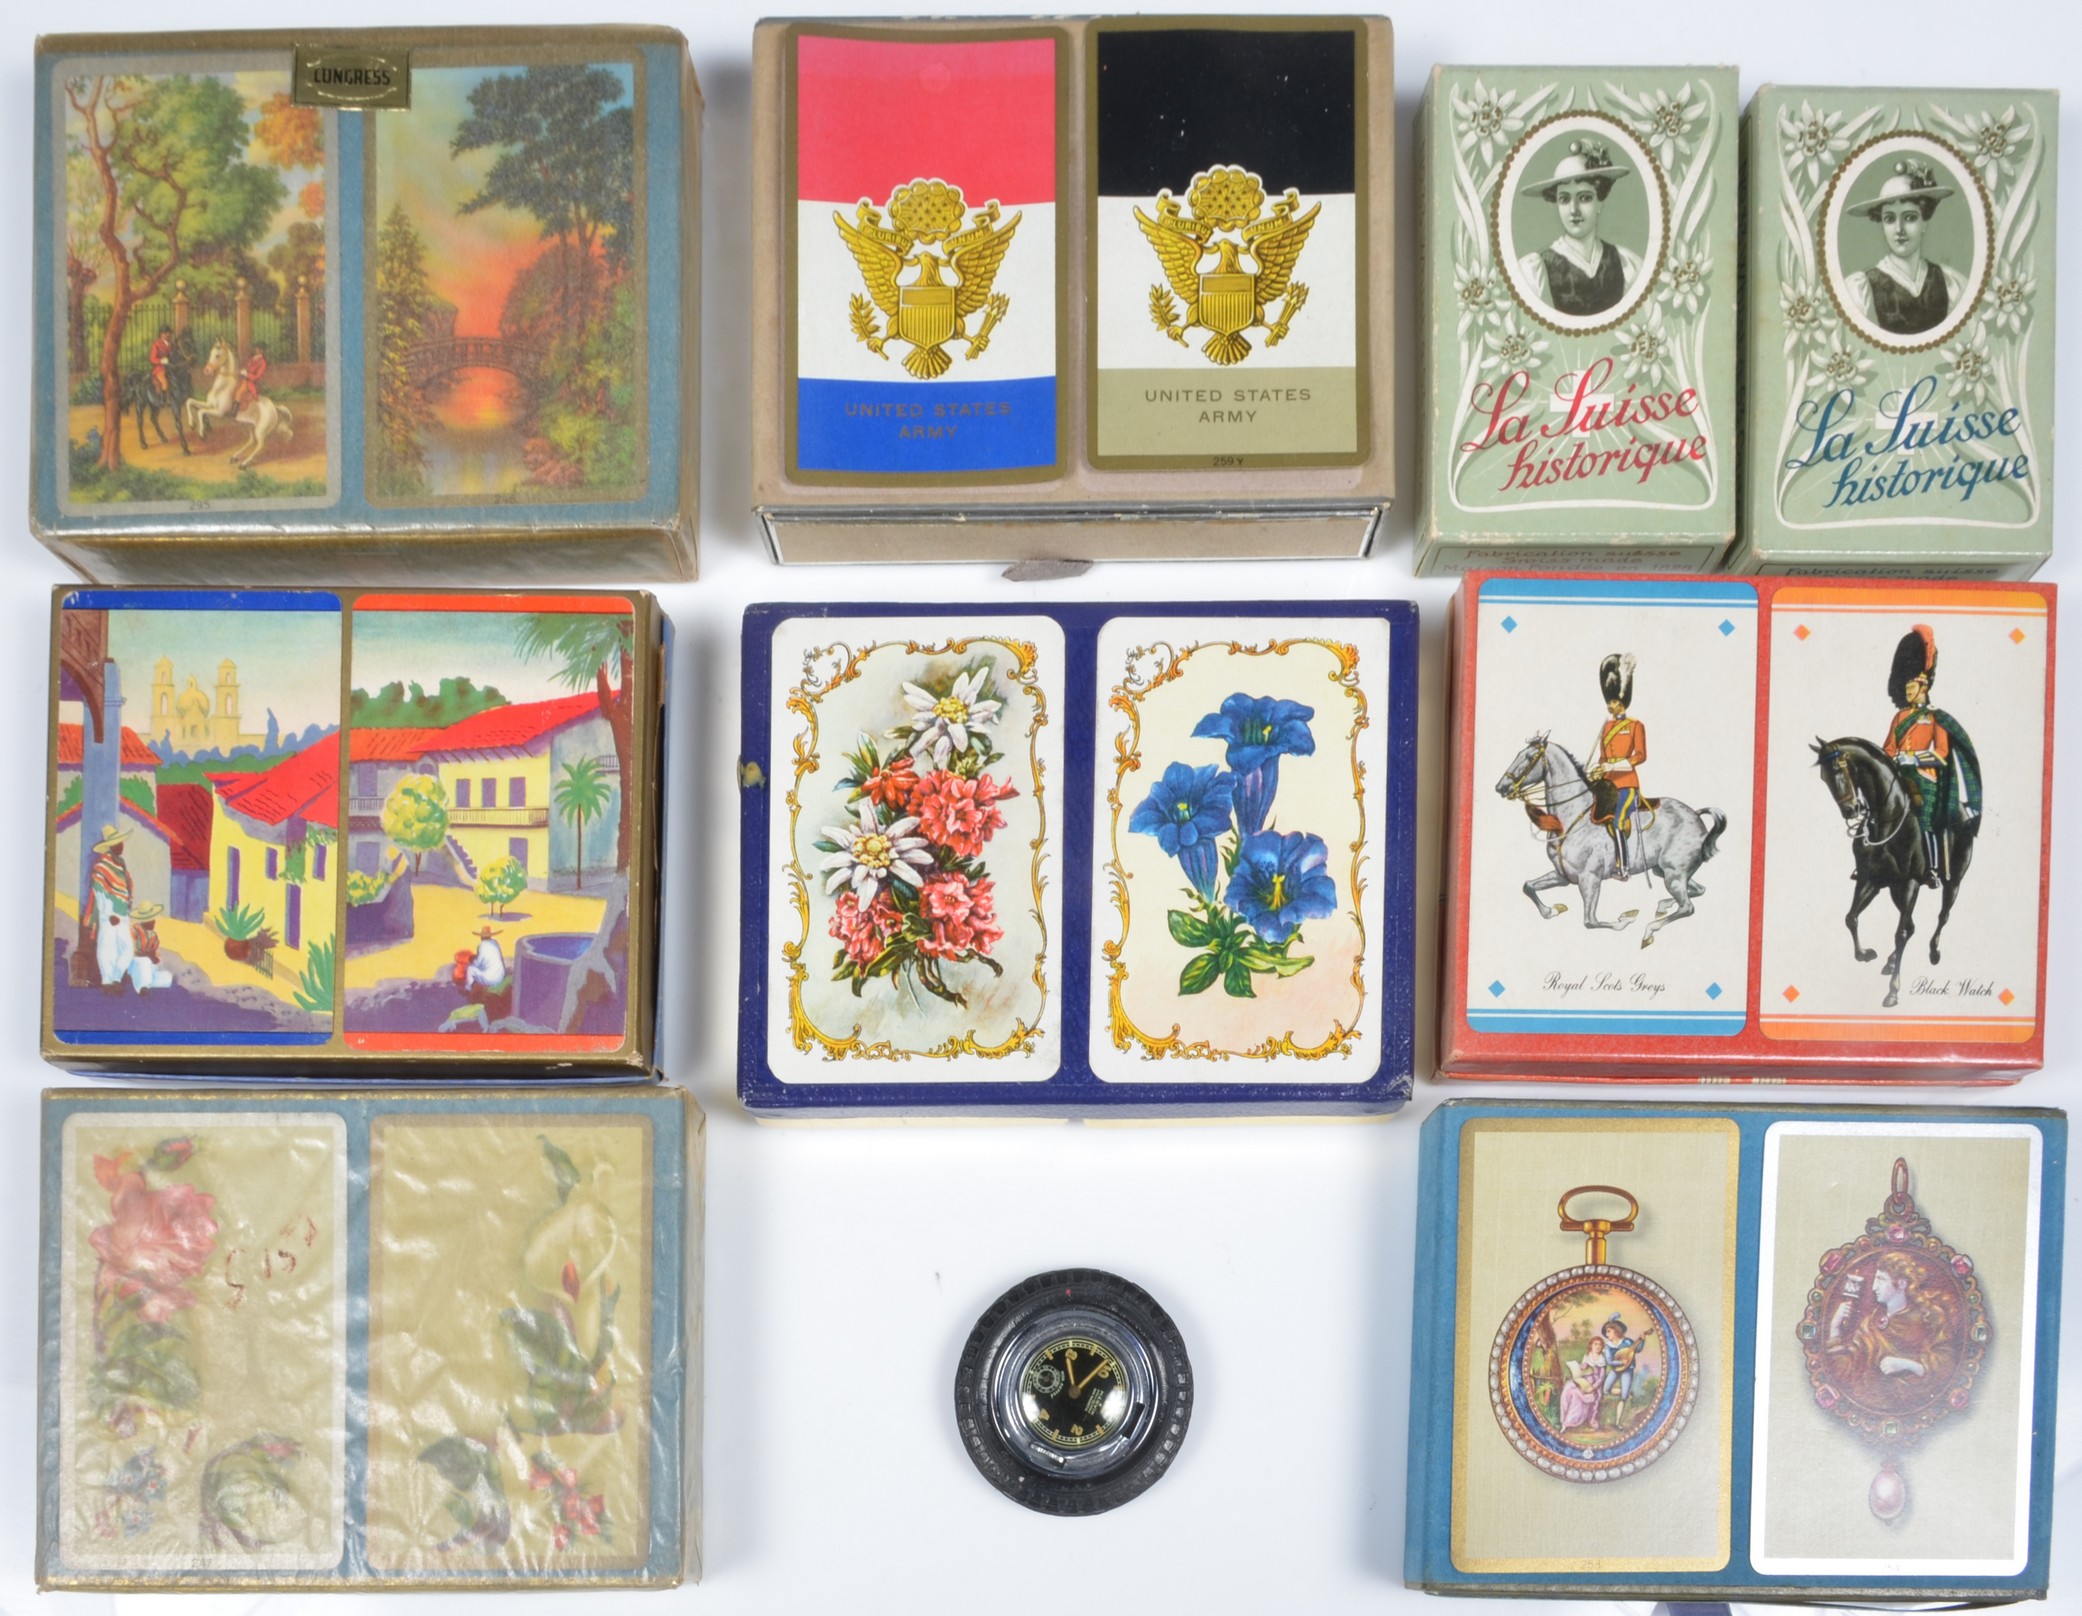  10 Vintage playing cards and 3b6a9a